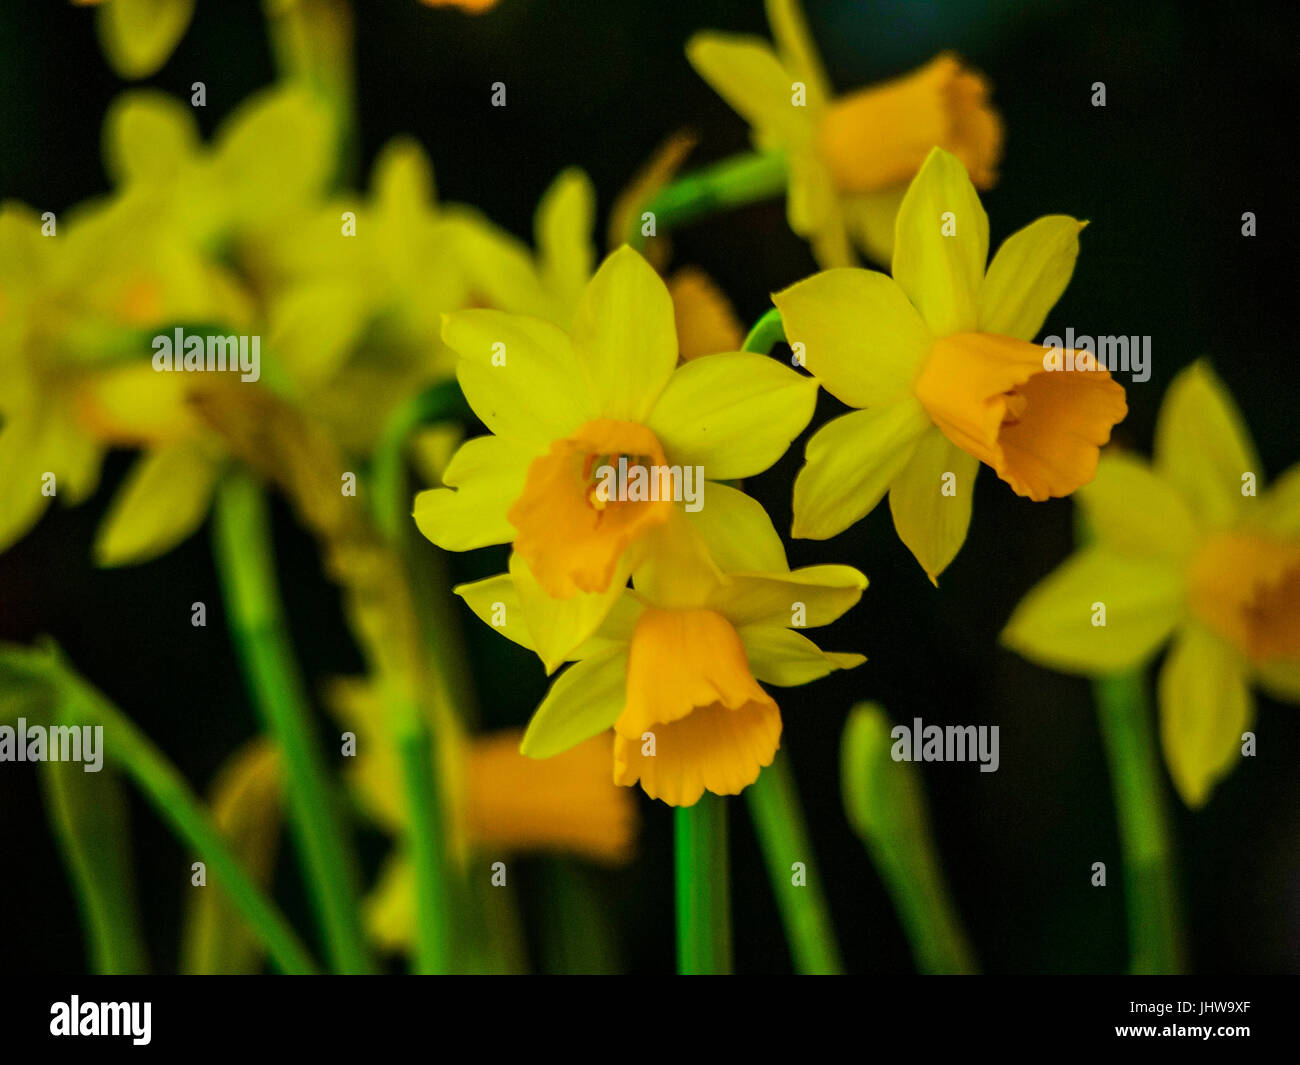 Daffodils in Spring time. Stock Photo